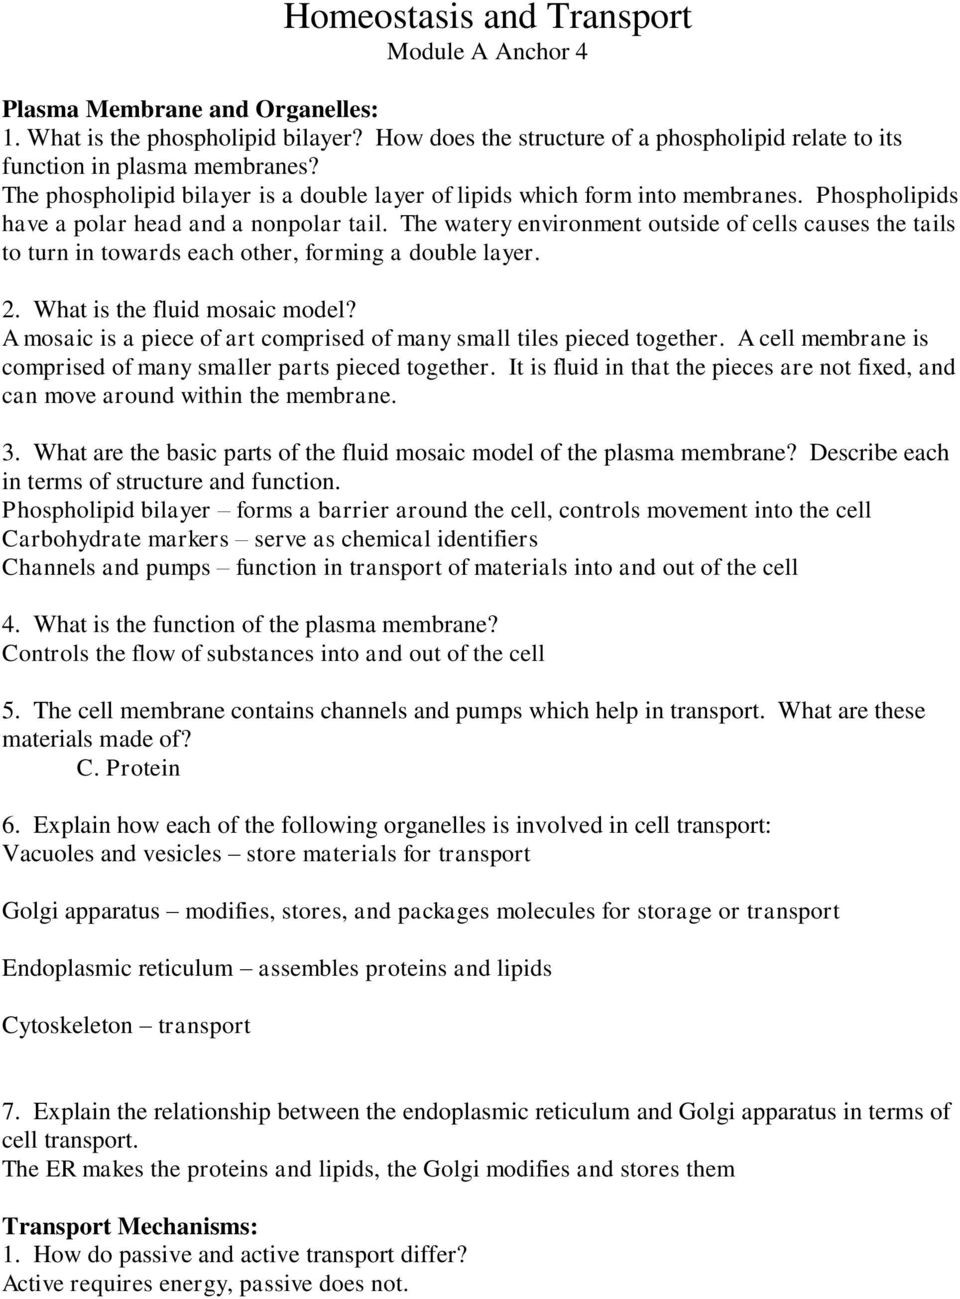 Cell Transport Worksheet Biology Answers Homeostasis and Transport Module A Anchor 4 Pdf Free Download